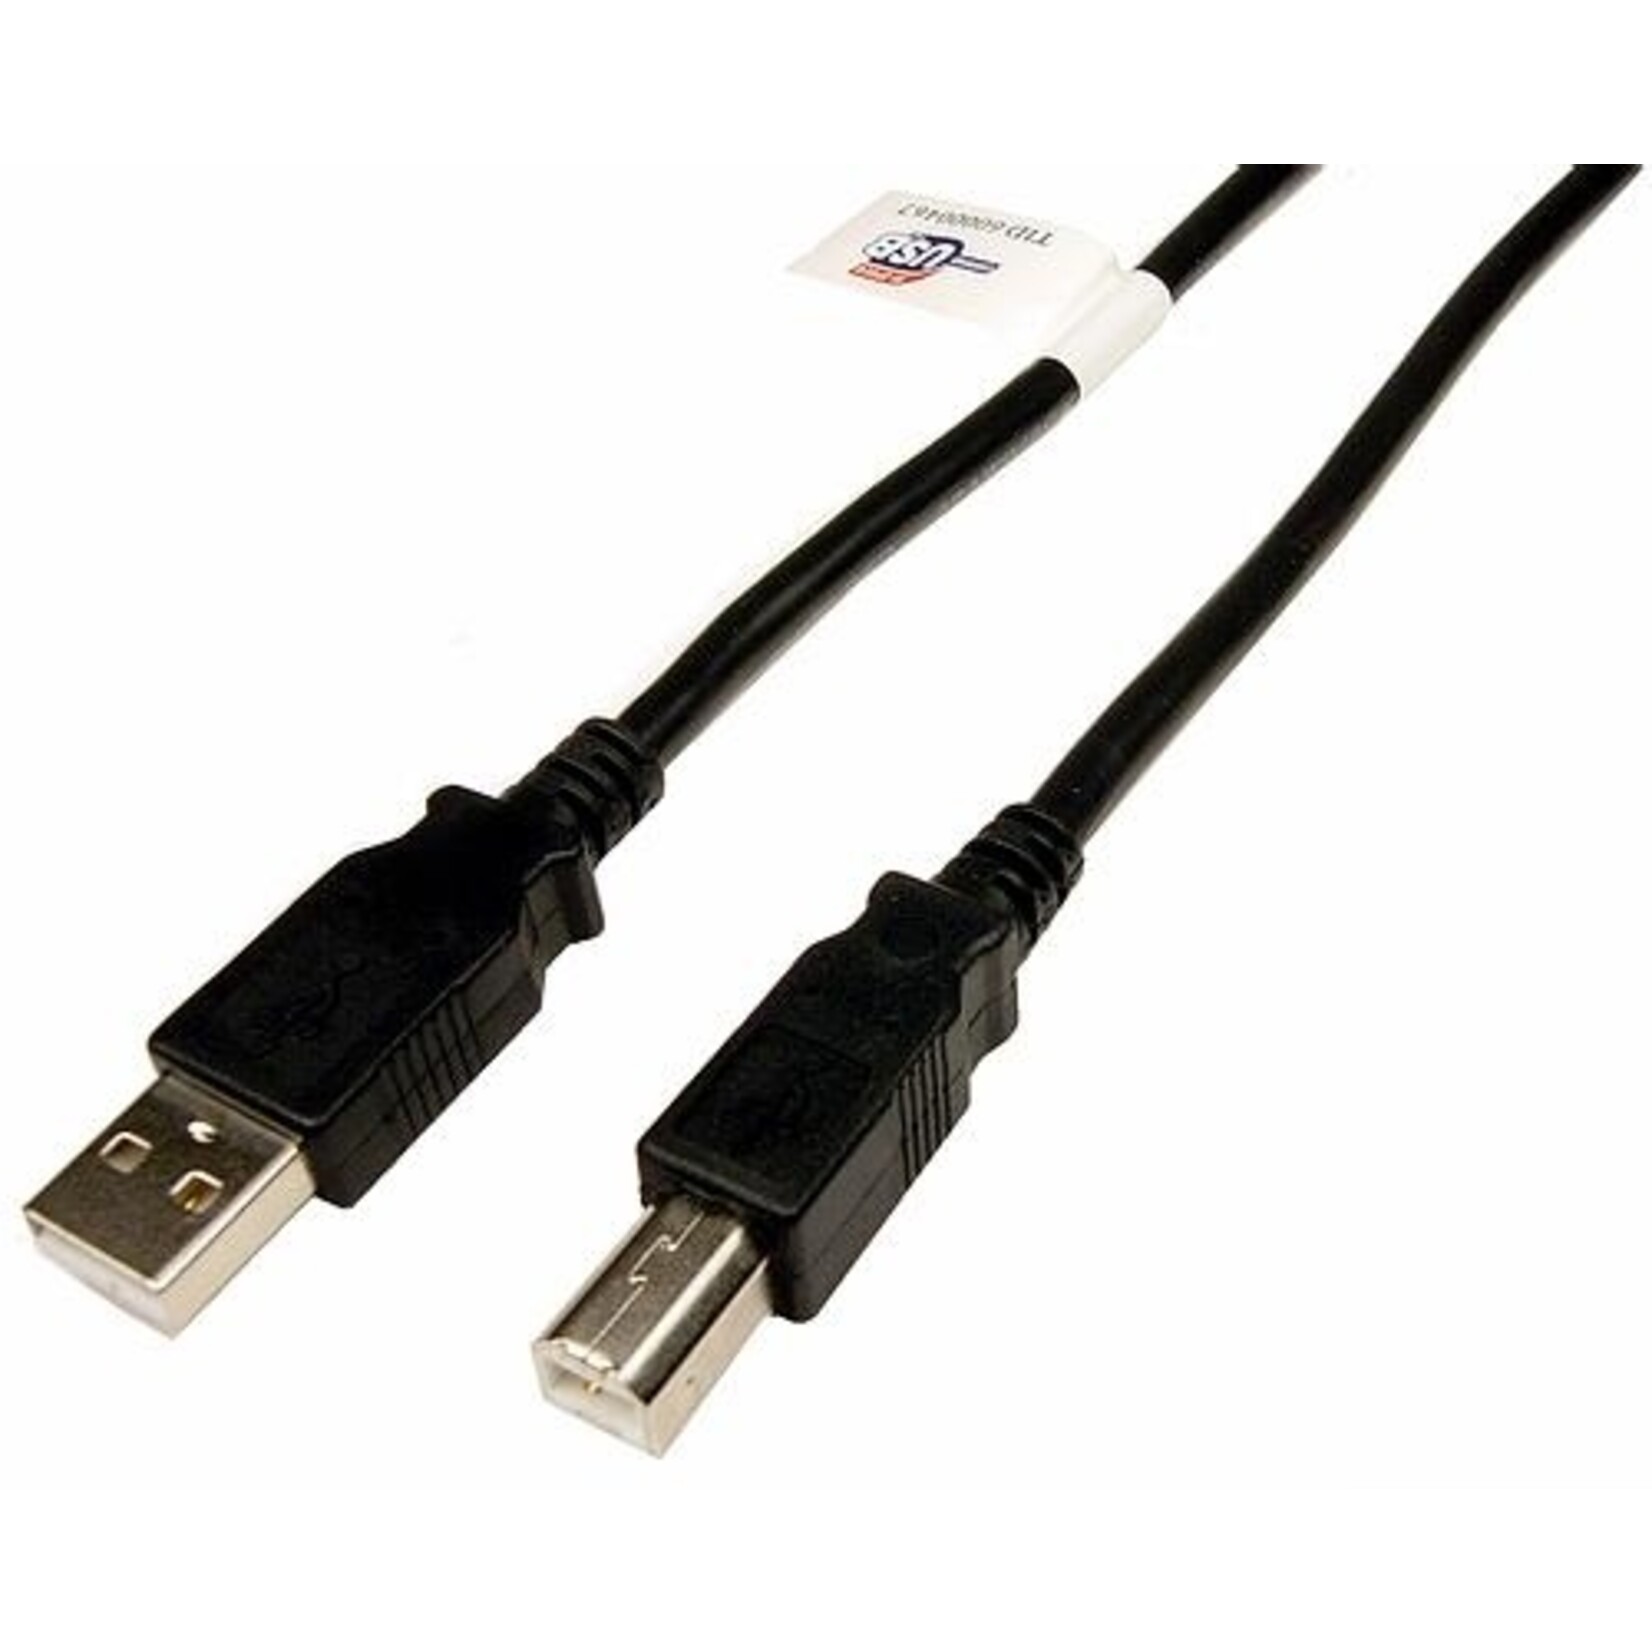 10' USB 2.0 A M to B M cable